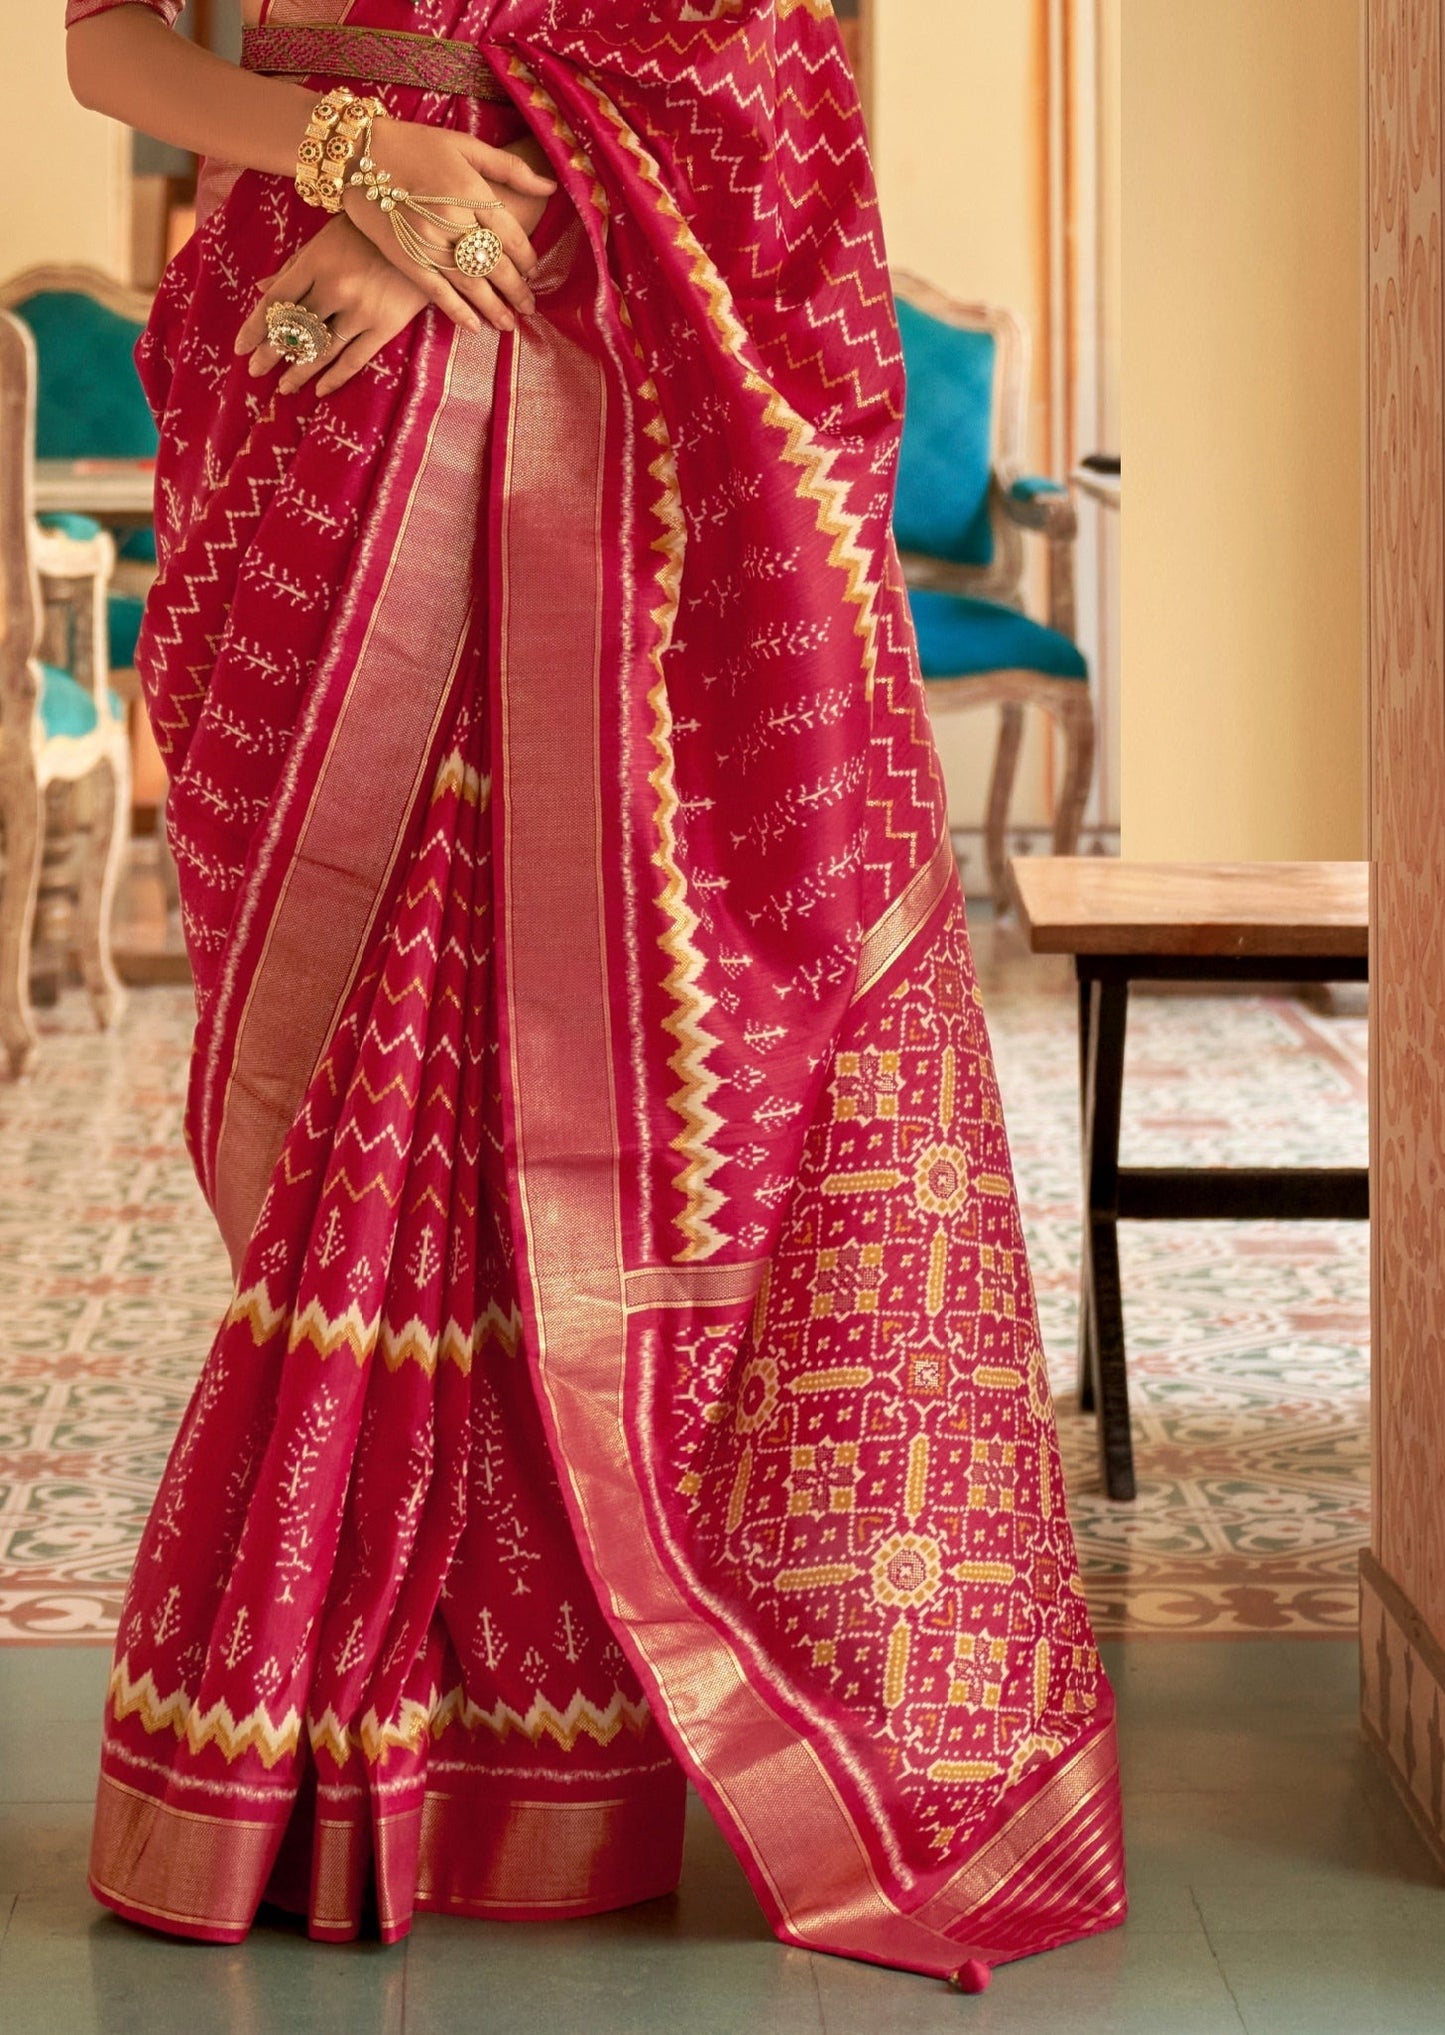 Patola silk red color double ikkat saree online shopping in latest designs.